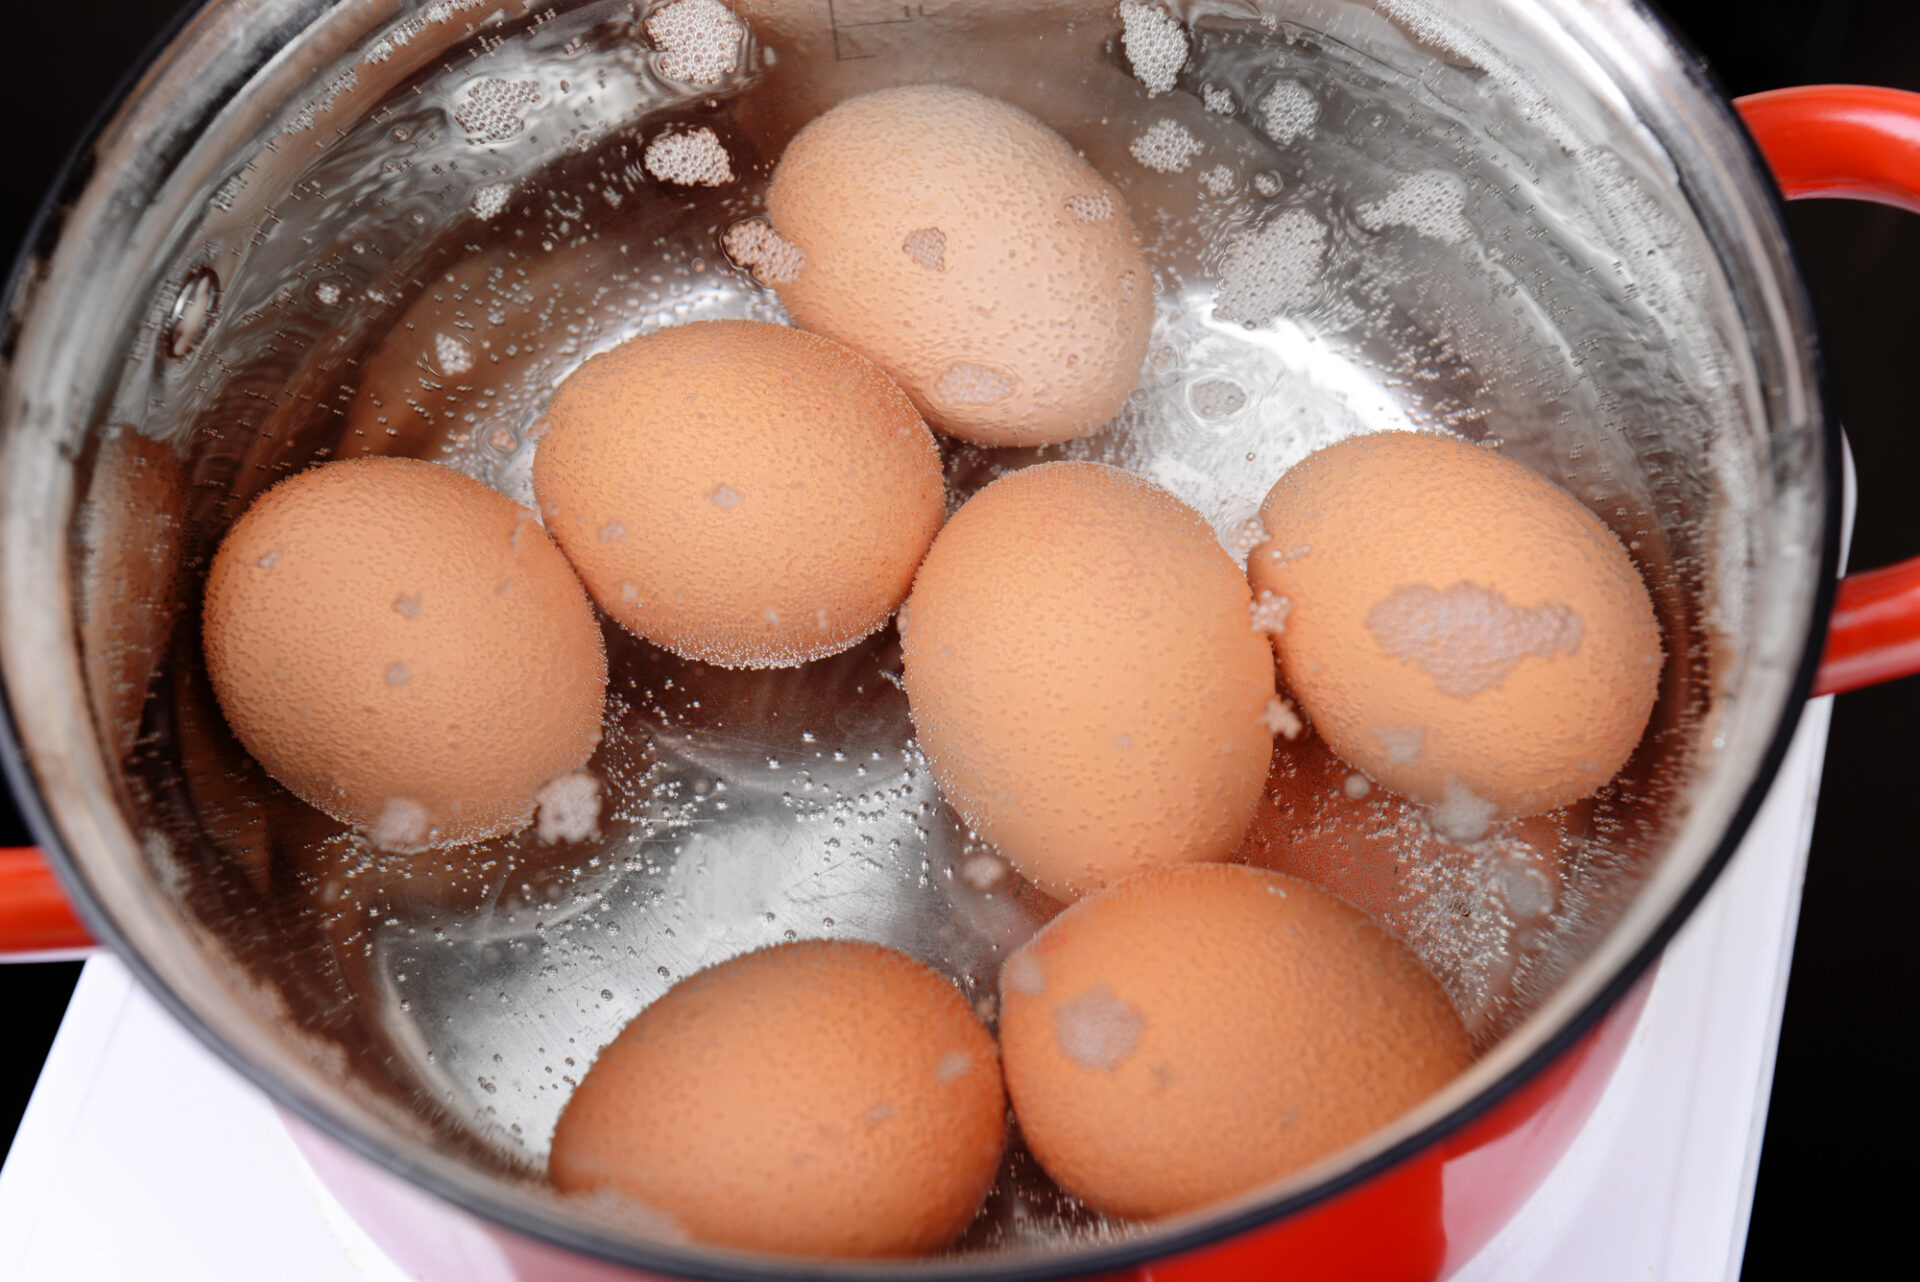 Boiling eggs in hot water.